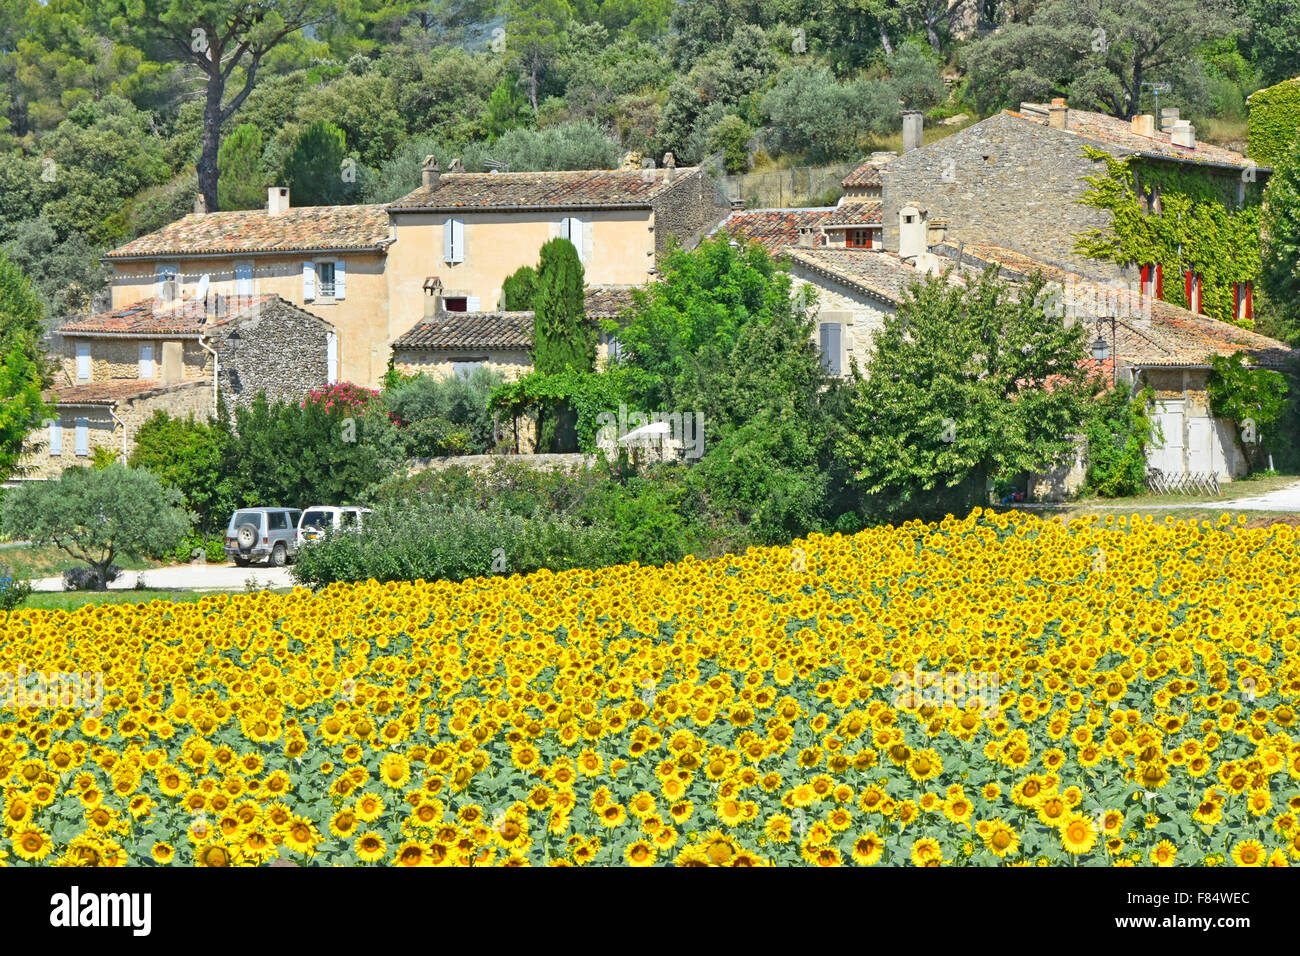 Lourmarin village in the French Luberon area of Provence France cluster of dwellings beside sunflower field crop Stock Photo